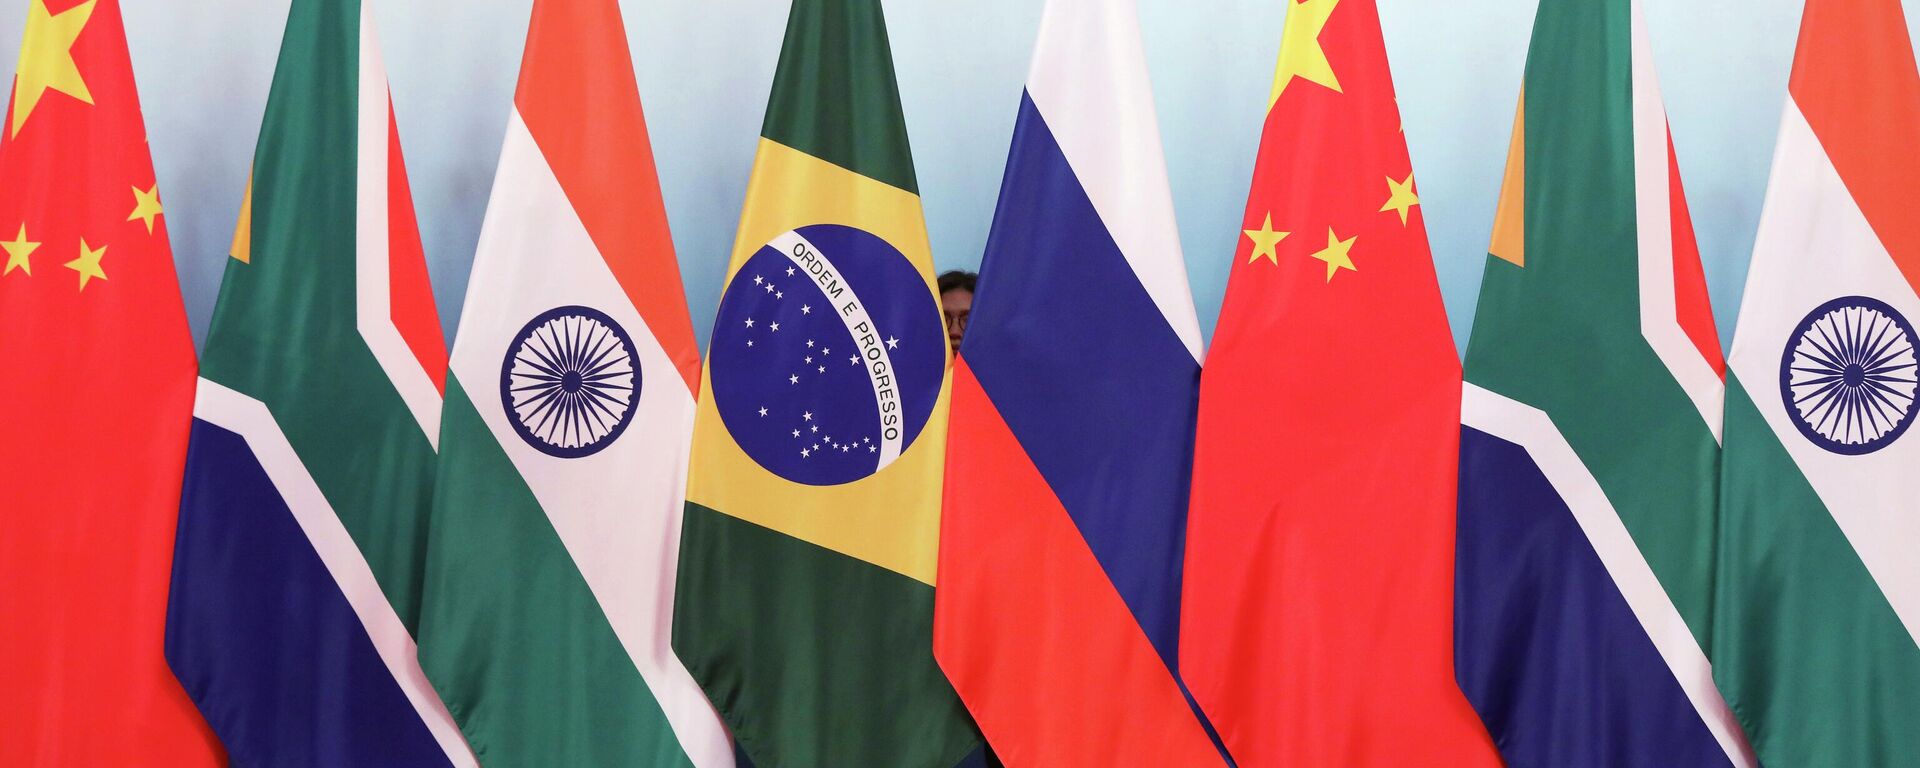 Staff worker stands behind national flags of Brazil, Russia, China, South Africa and India to tidy the flags ahead of a group photo during the BRICS Summit at the Xiamen International Conference and Exhibition Center in Xiamen, southeastern China's Fujian Province, Monday, Sept. 4, 2017. - Sputnik International, 1920, 06.01.2023